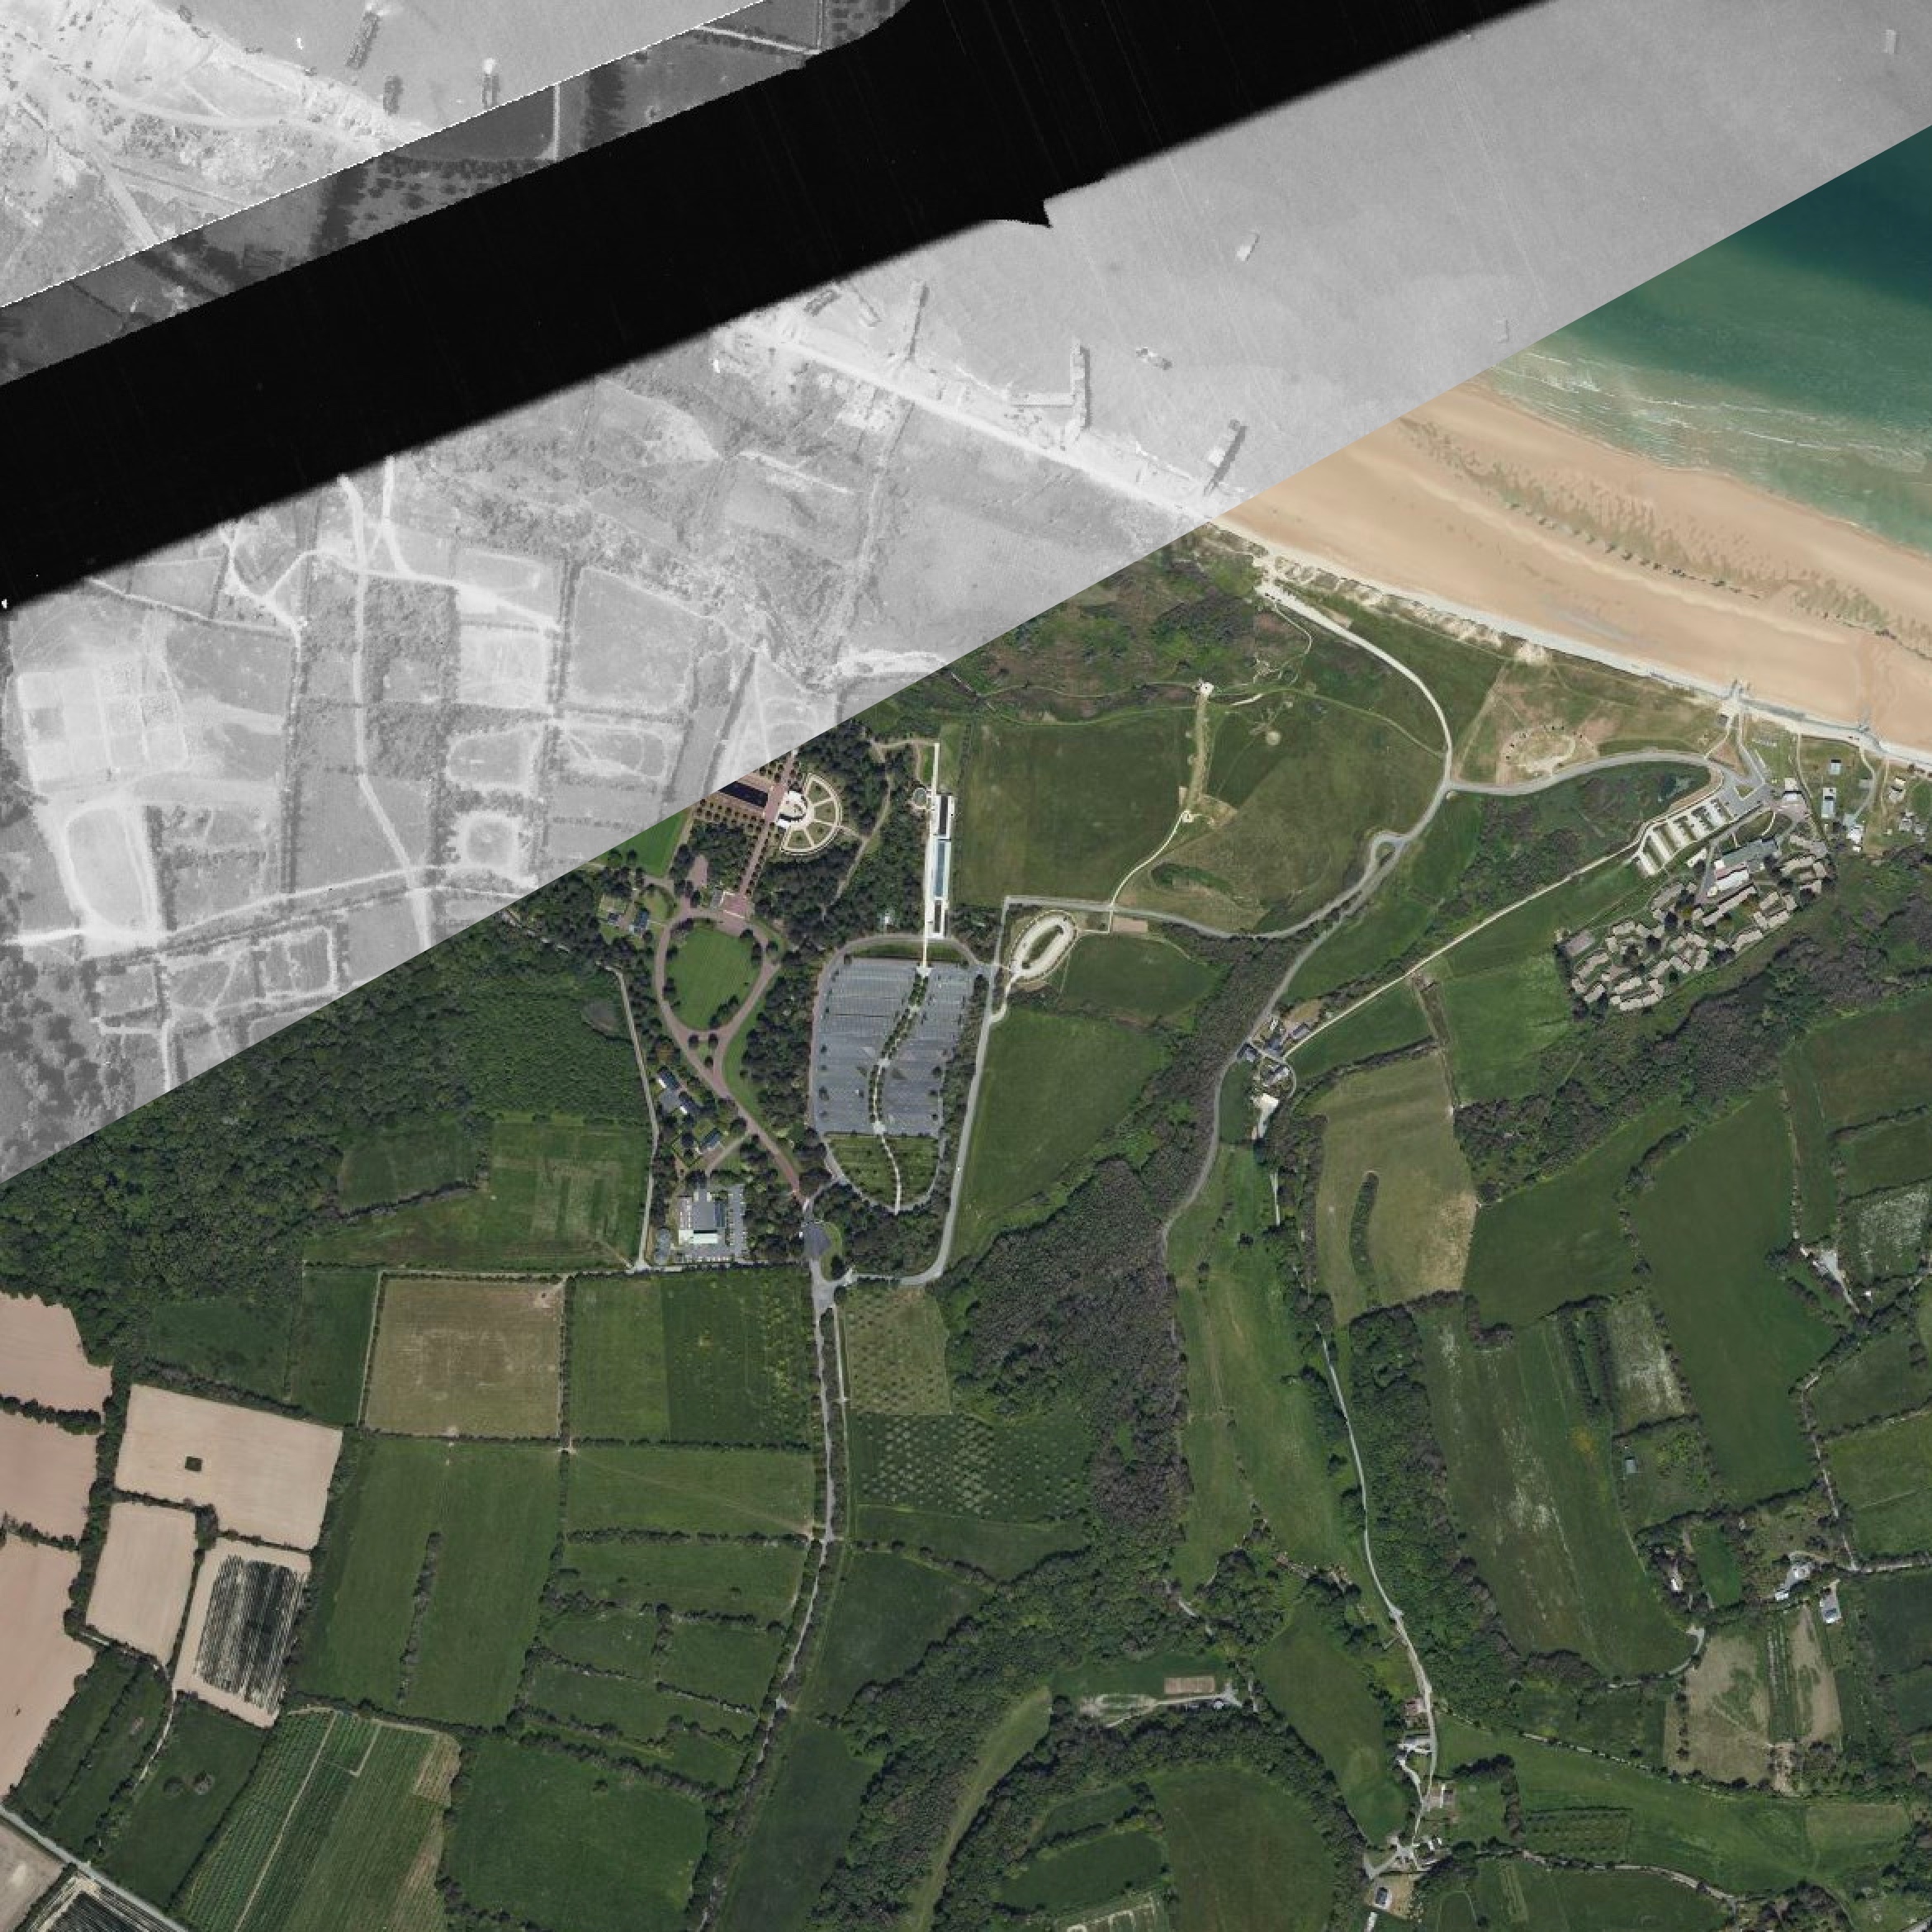 Aerial image showcasing a coastal area with a blend of historical monochrome and modern colored sections illustrating changes over time, including a beach, roads, fields, and various structures.